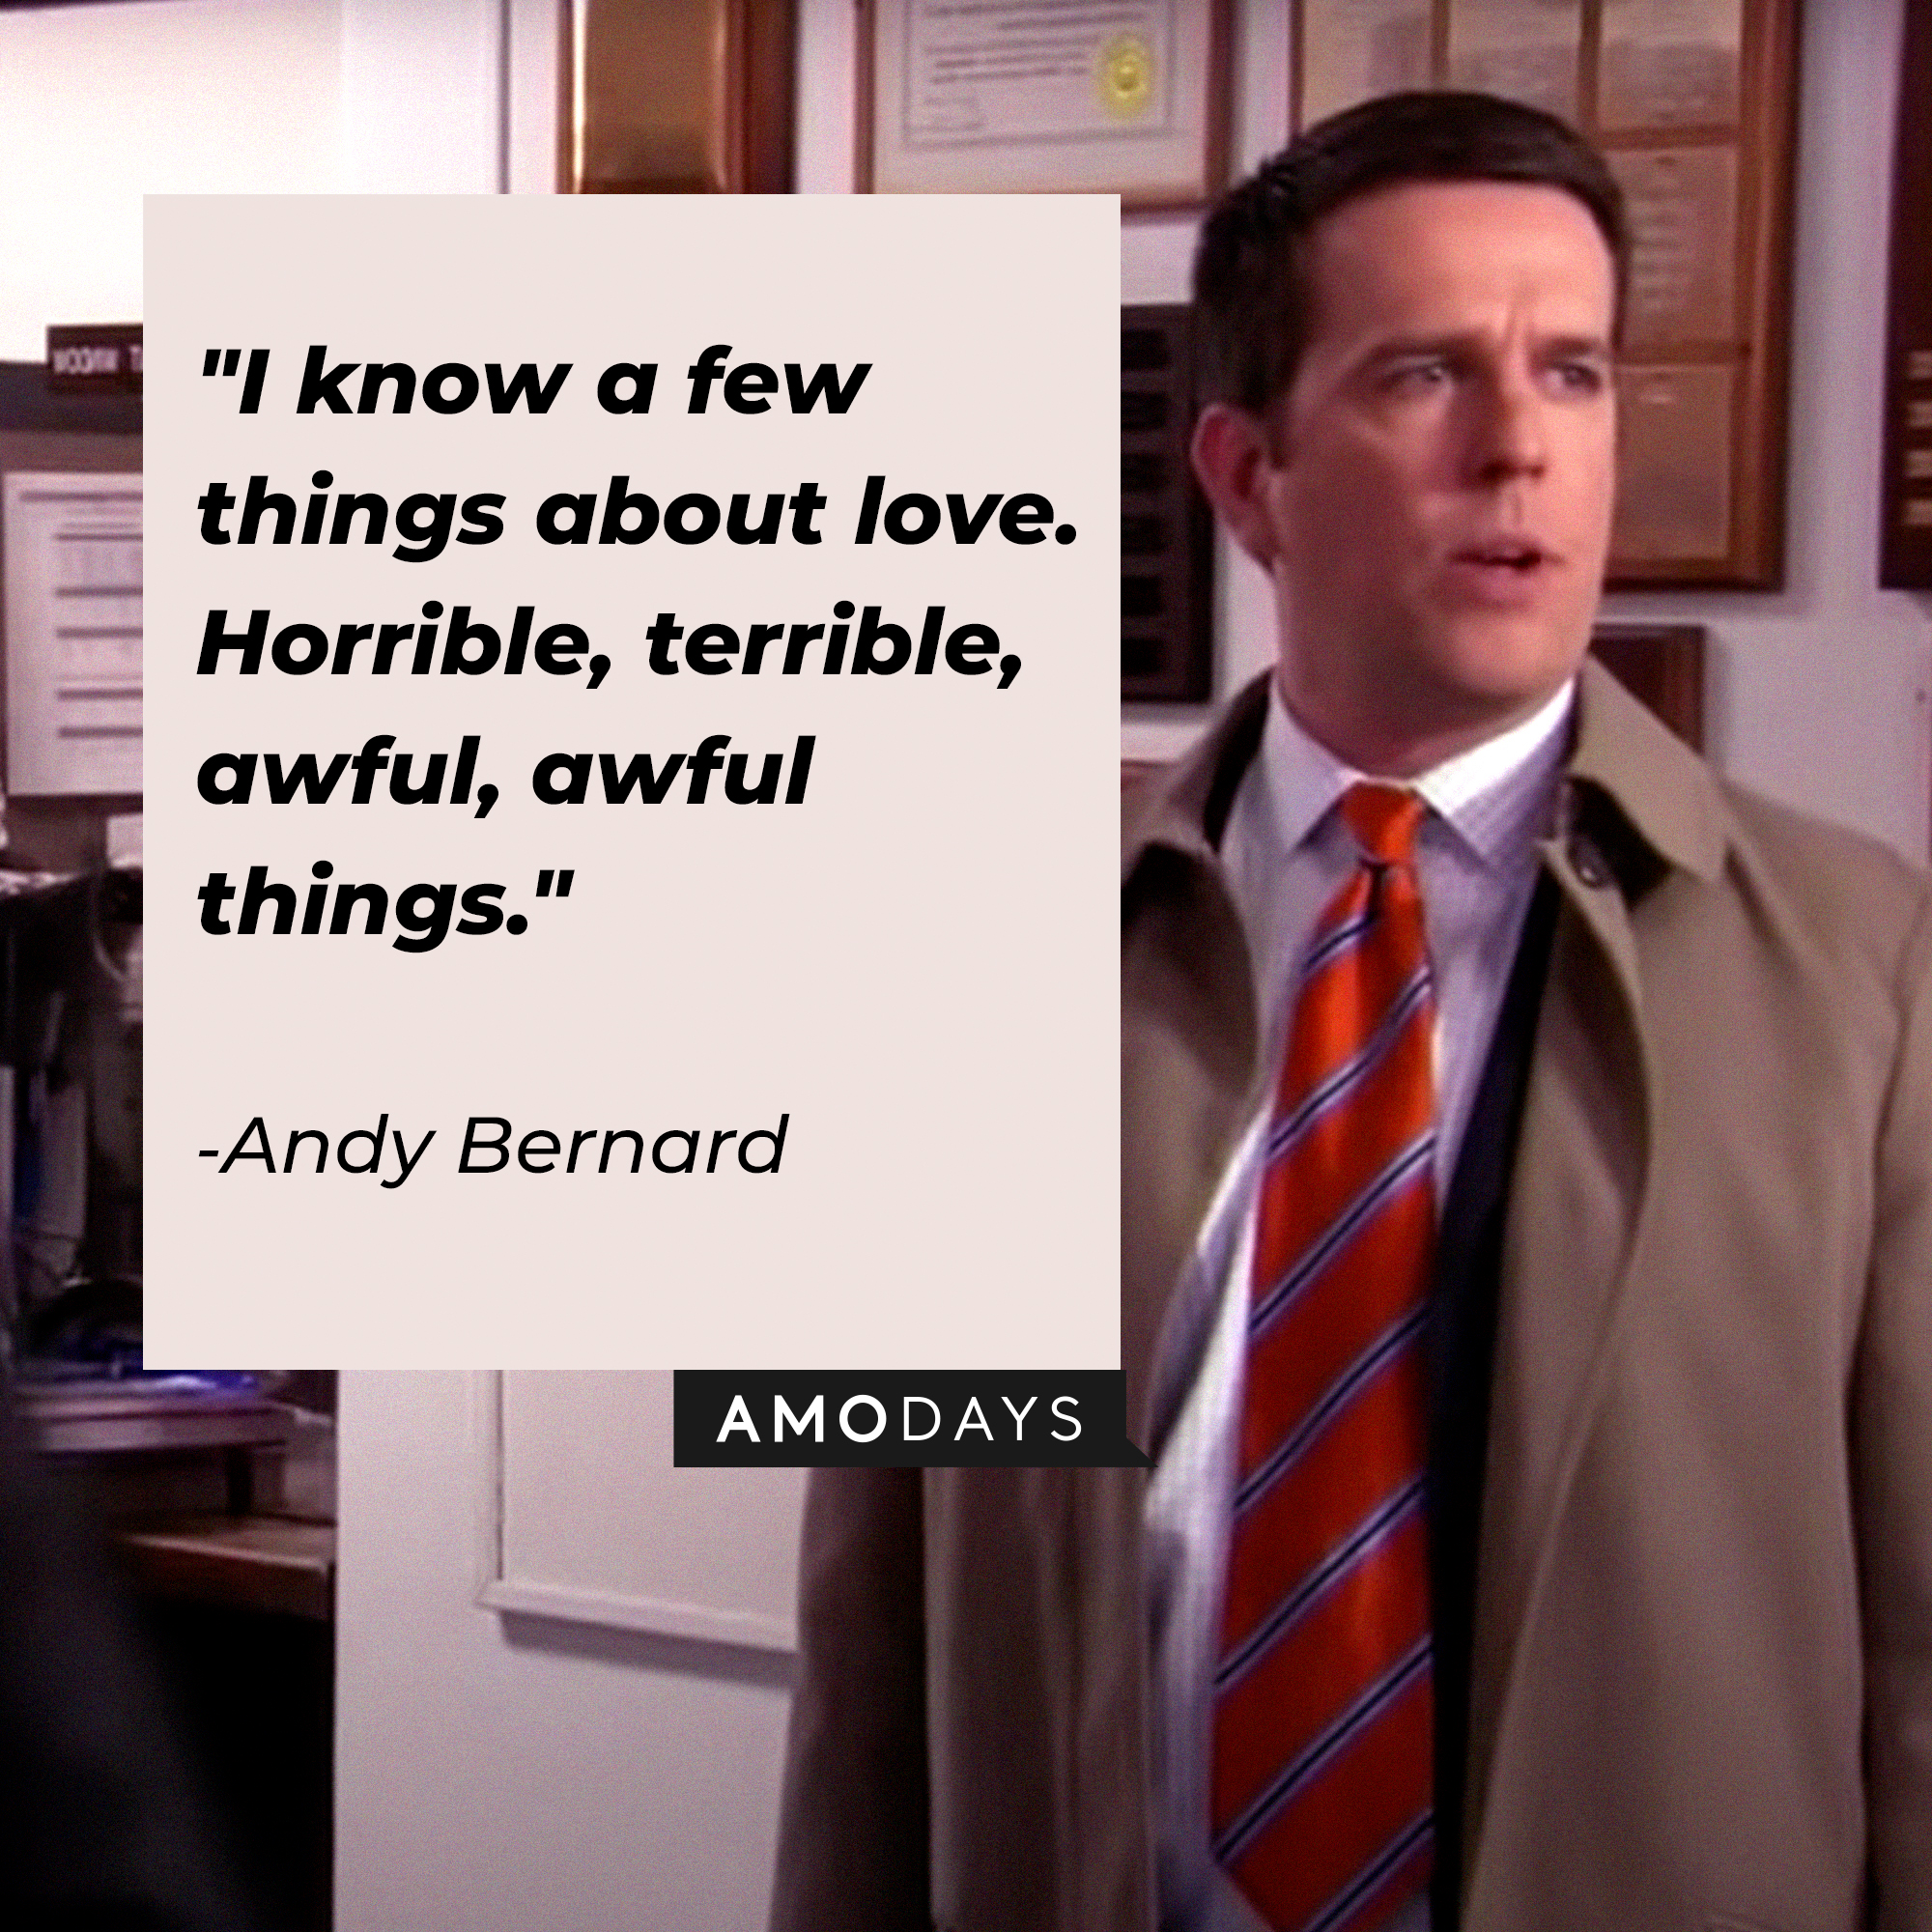 Andy Bernard, with his quote: “I know a few things about love. Horrible, terrible, awful, awful things.”│ Source: youtube.com/TheOffice